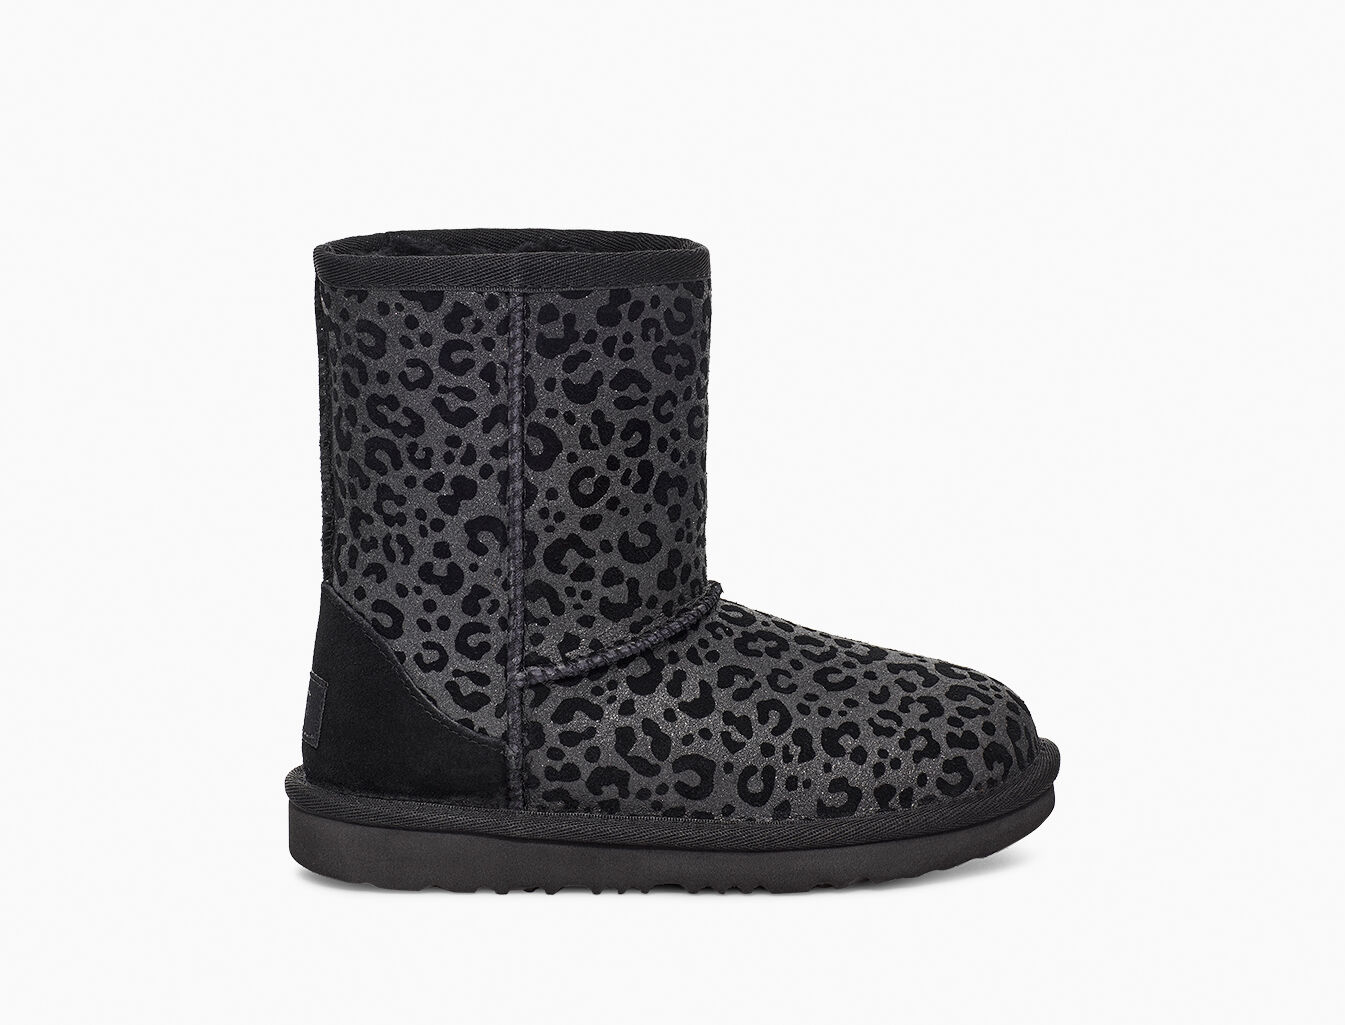 black ugg boots with glitter